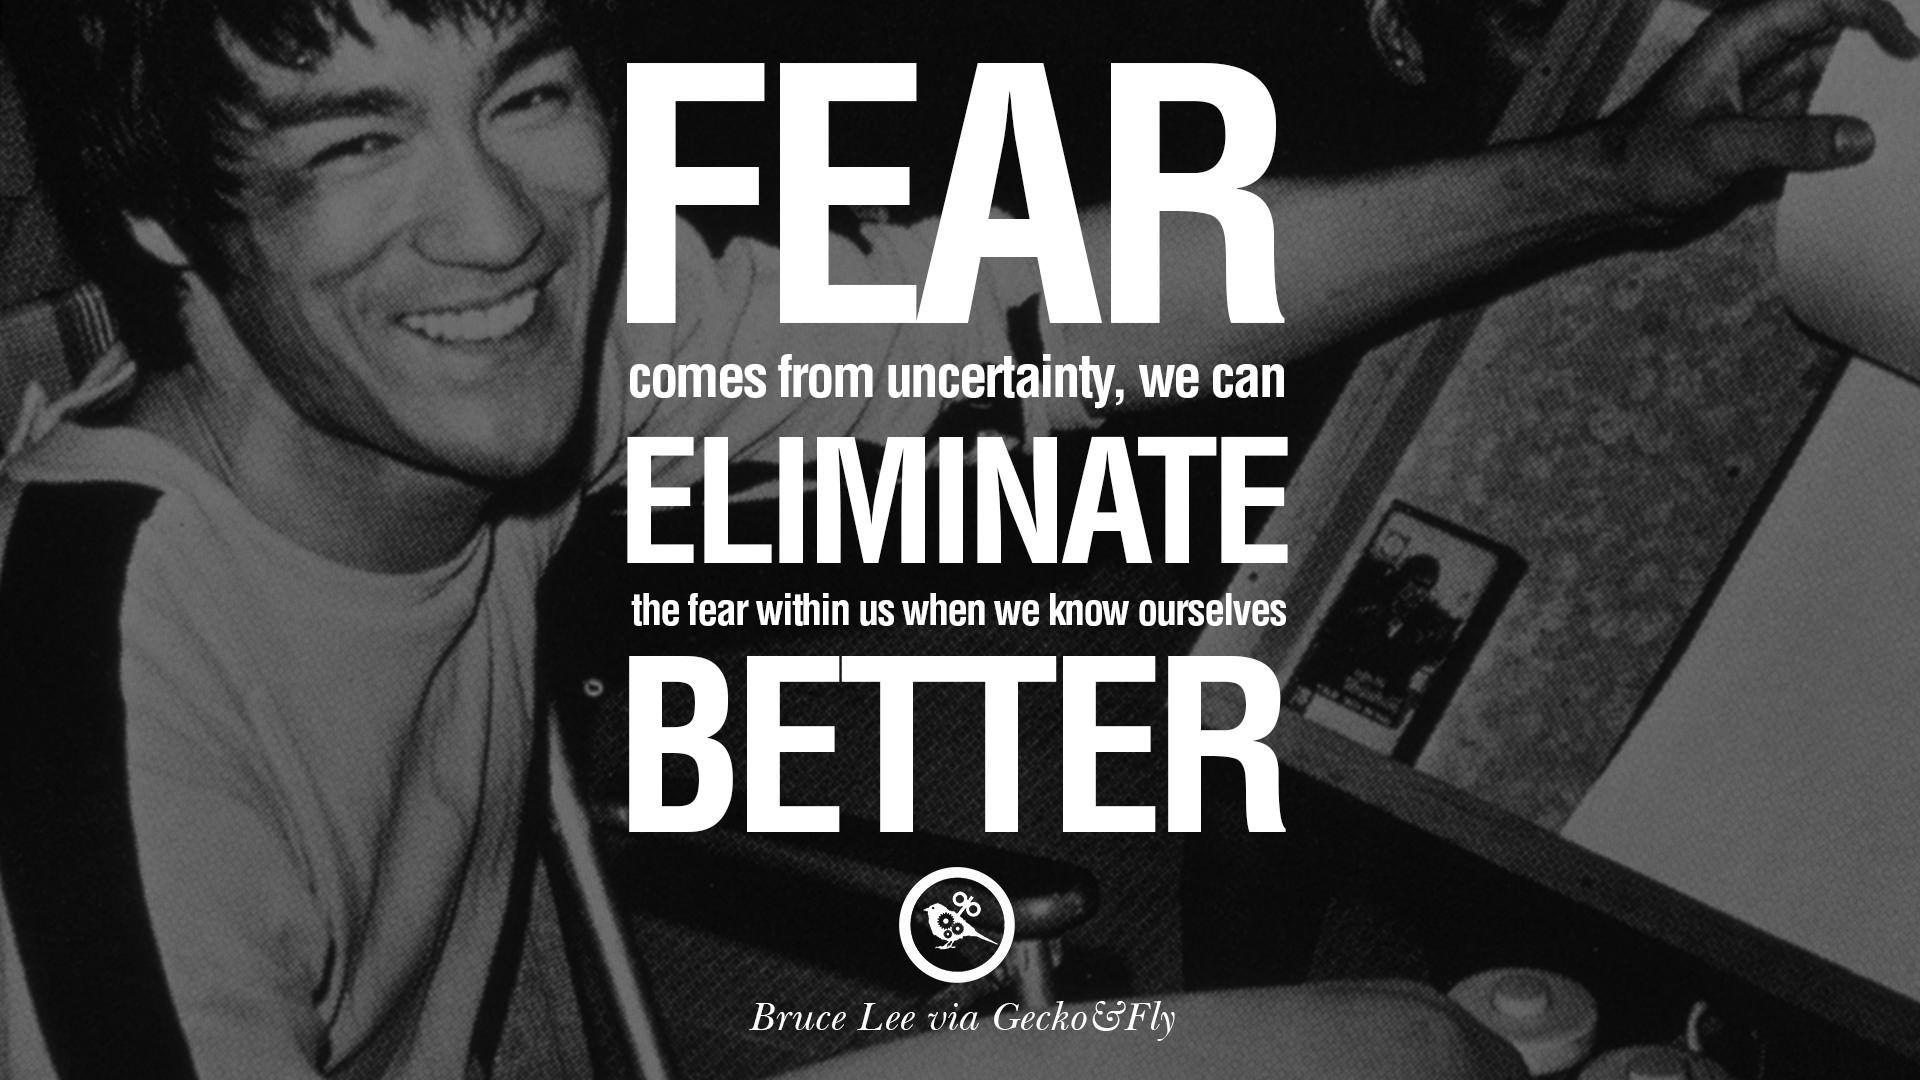 Bruce Lee Quotes Wallpapers - Top Free Bruce Lee Quotes Backgrounds